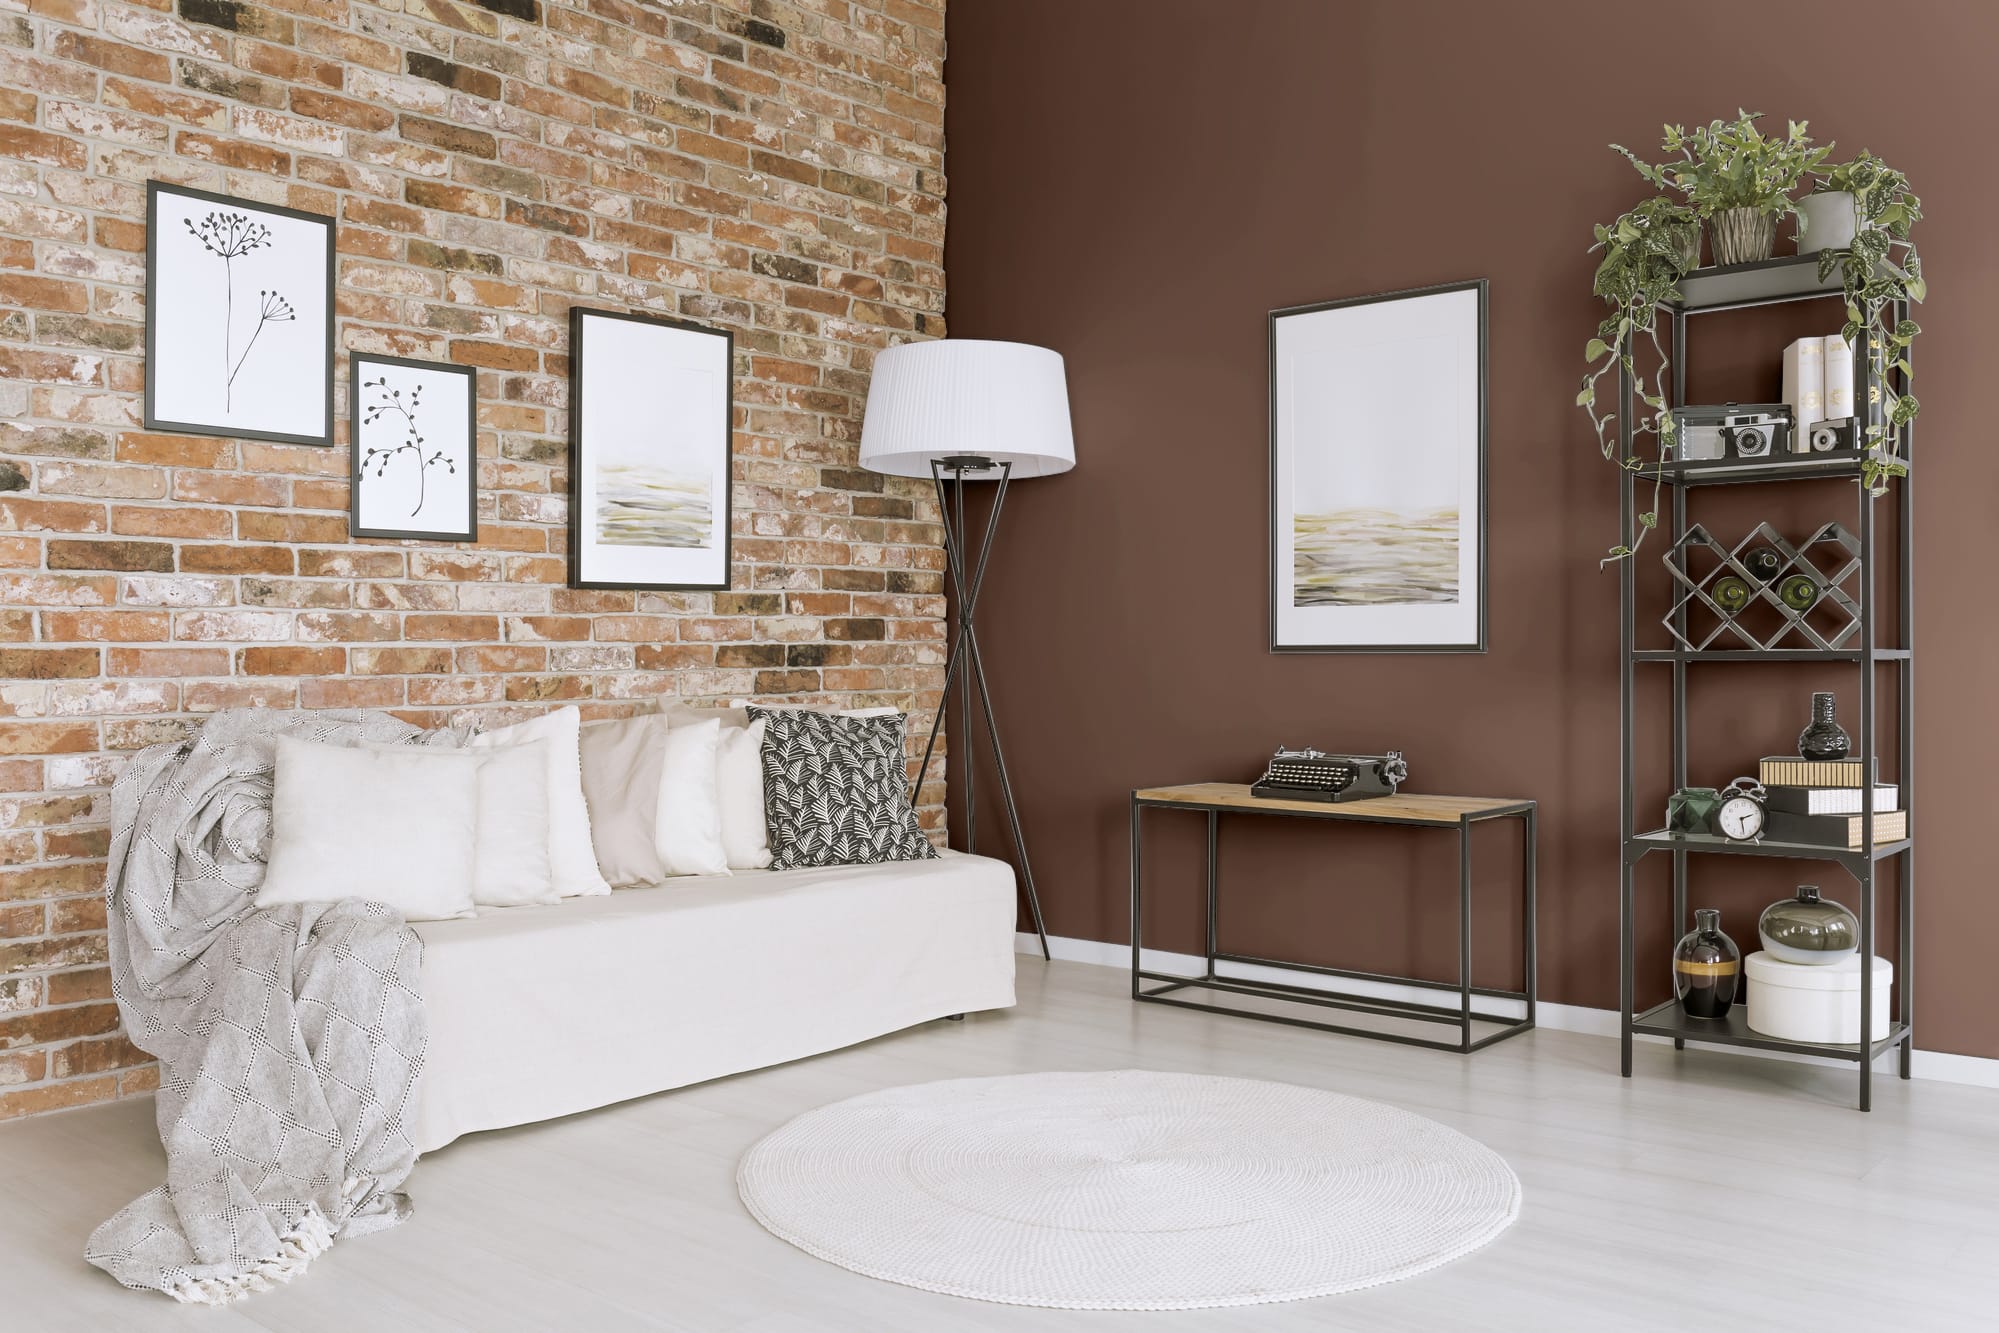 12 Beautiful Paint Colors That Complement Red Brick